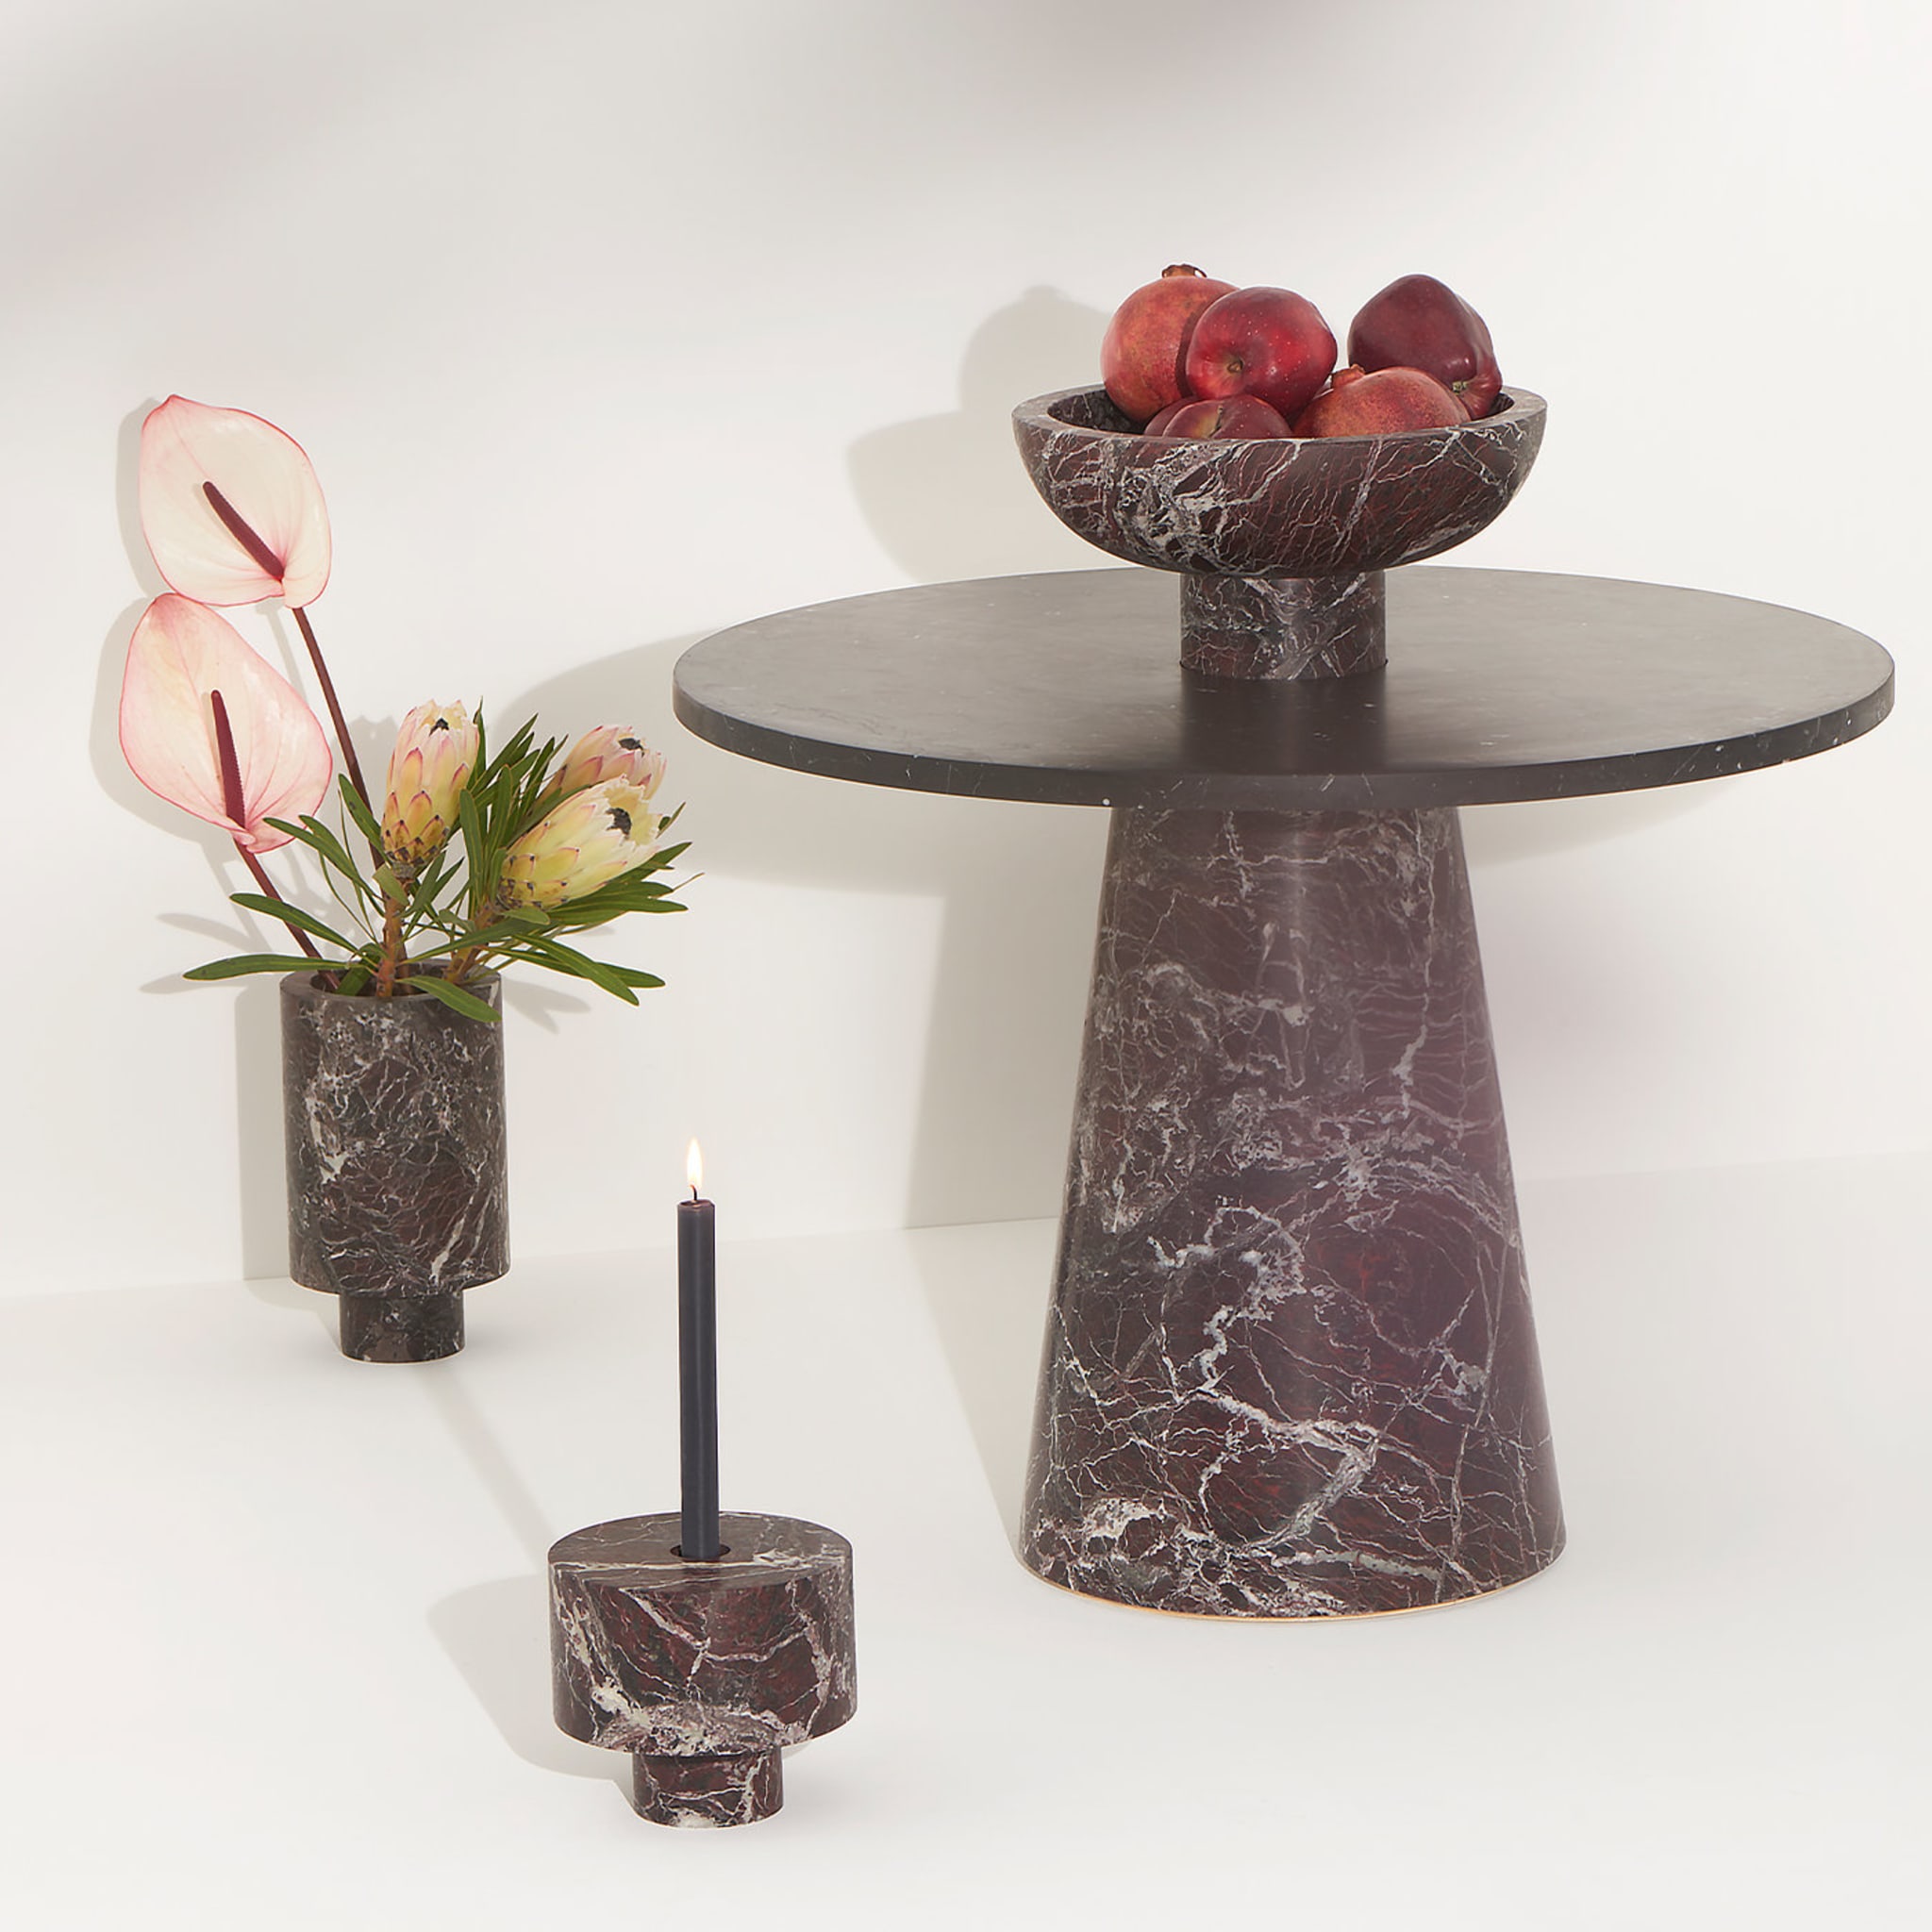 Inside Out Coffee Table with Accessories by Karen Chekerdjian #2 - Alternative view 1